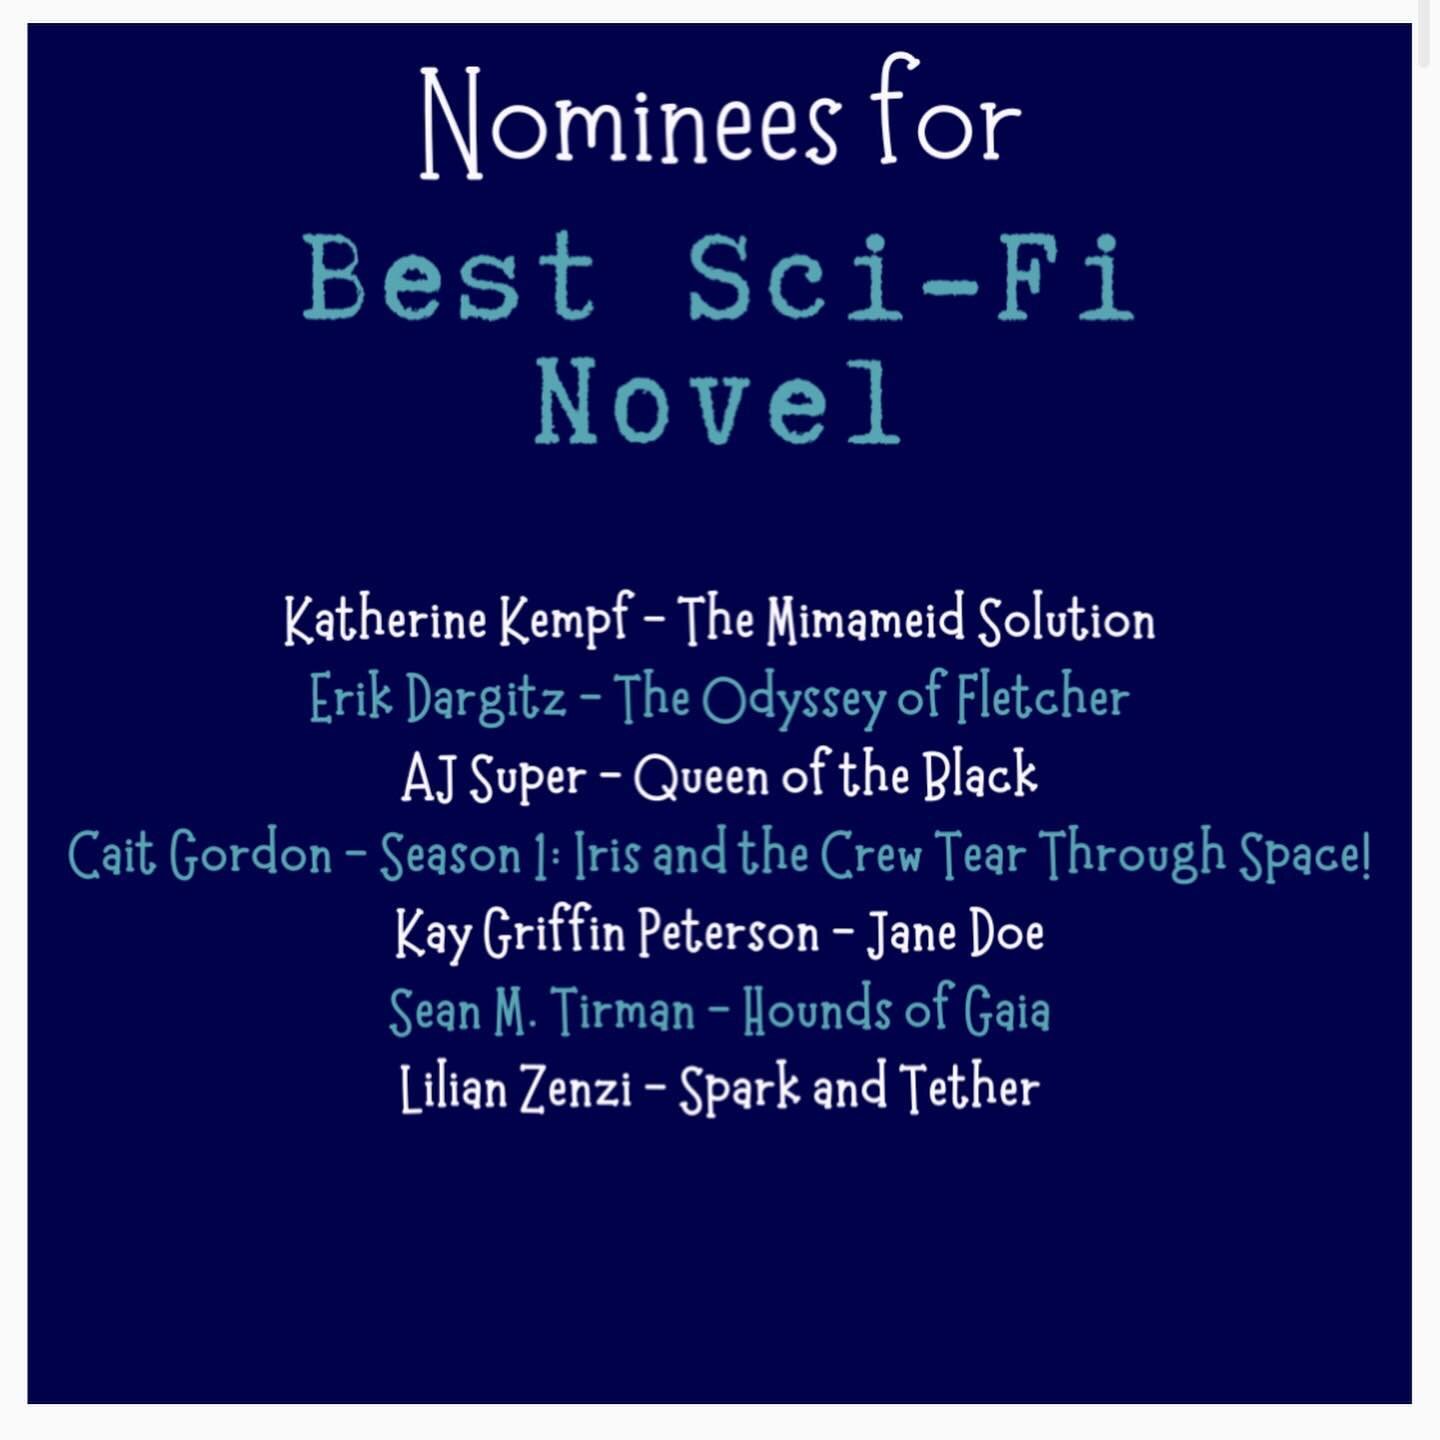 In the midst of a lot of heavy life stuff - a spot of light✨

We&rsquo;ve been nomimated for The Indieverse Awards💫

Not only has The Mimameid Solution made the cut for both Best Dystopian Novel and Best Sci-Fi Novel, but little old me, Katherine Ke